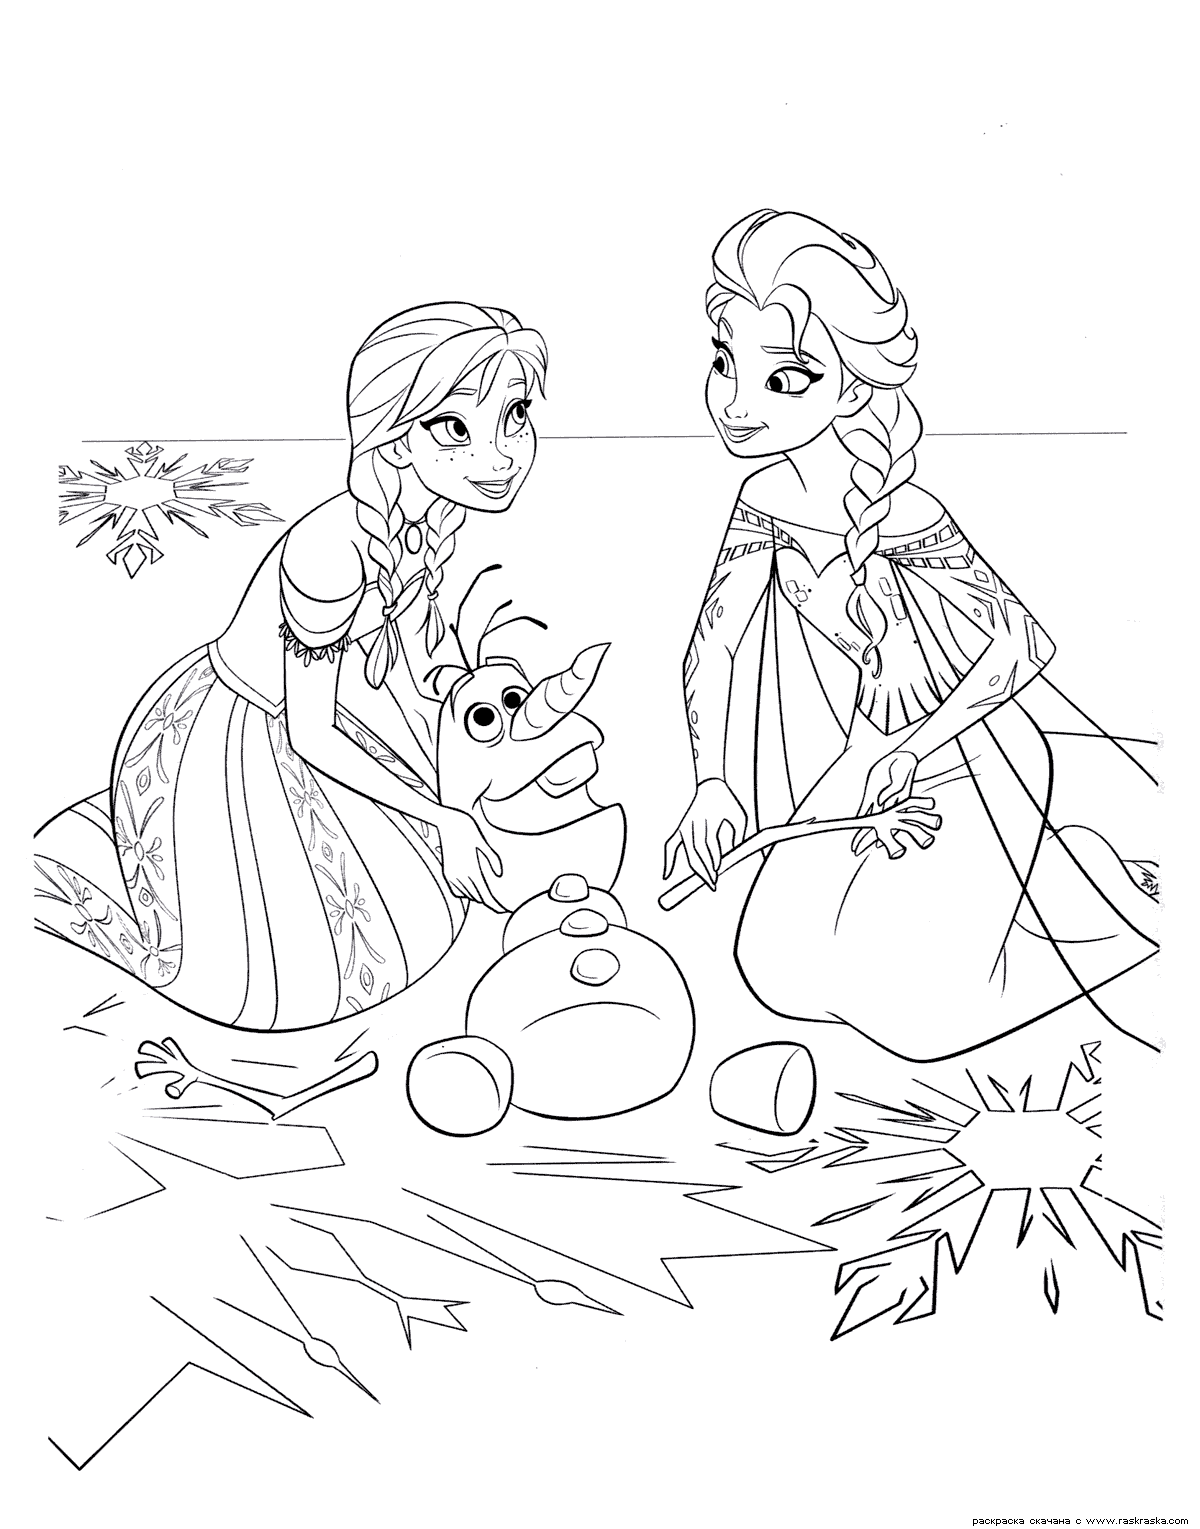 Frozen coloring pages, animated film characters Elsa